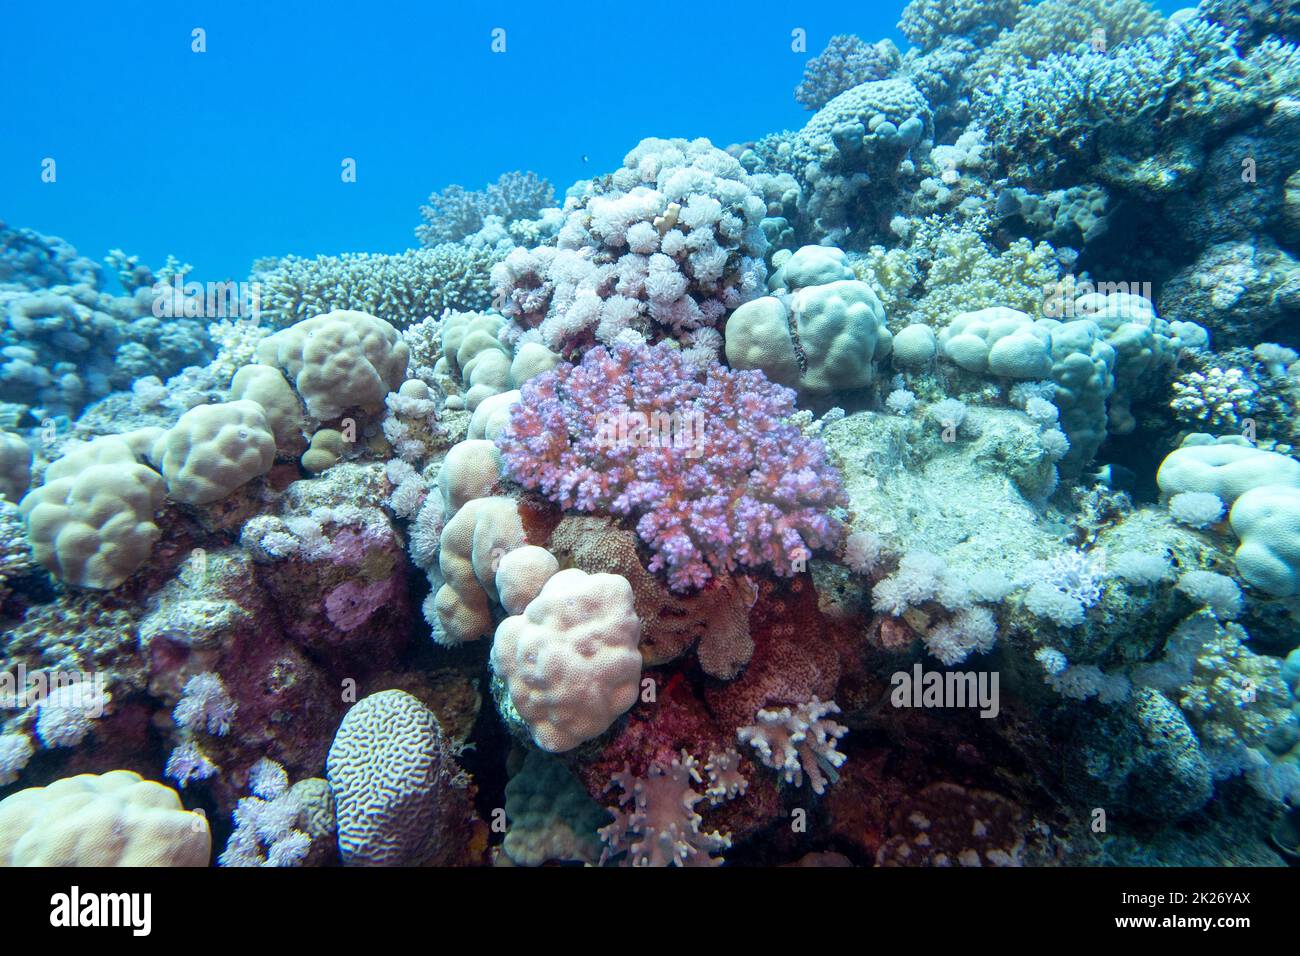 Colorful, picturesque coral reef at the bottom of tropical sea ...